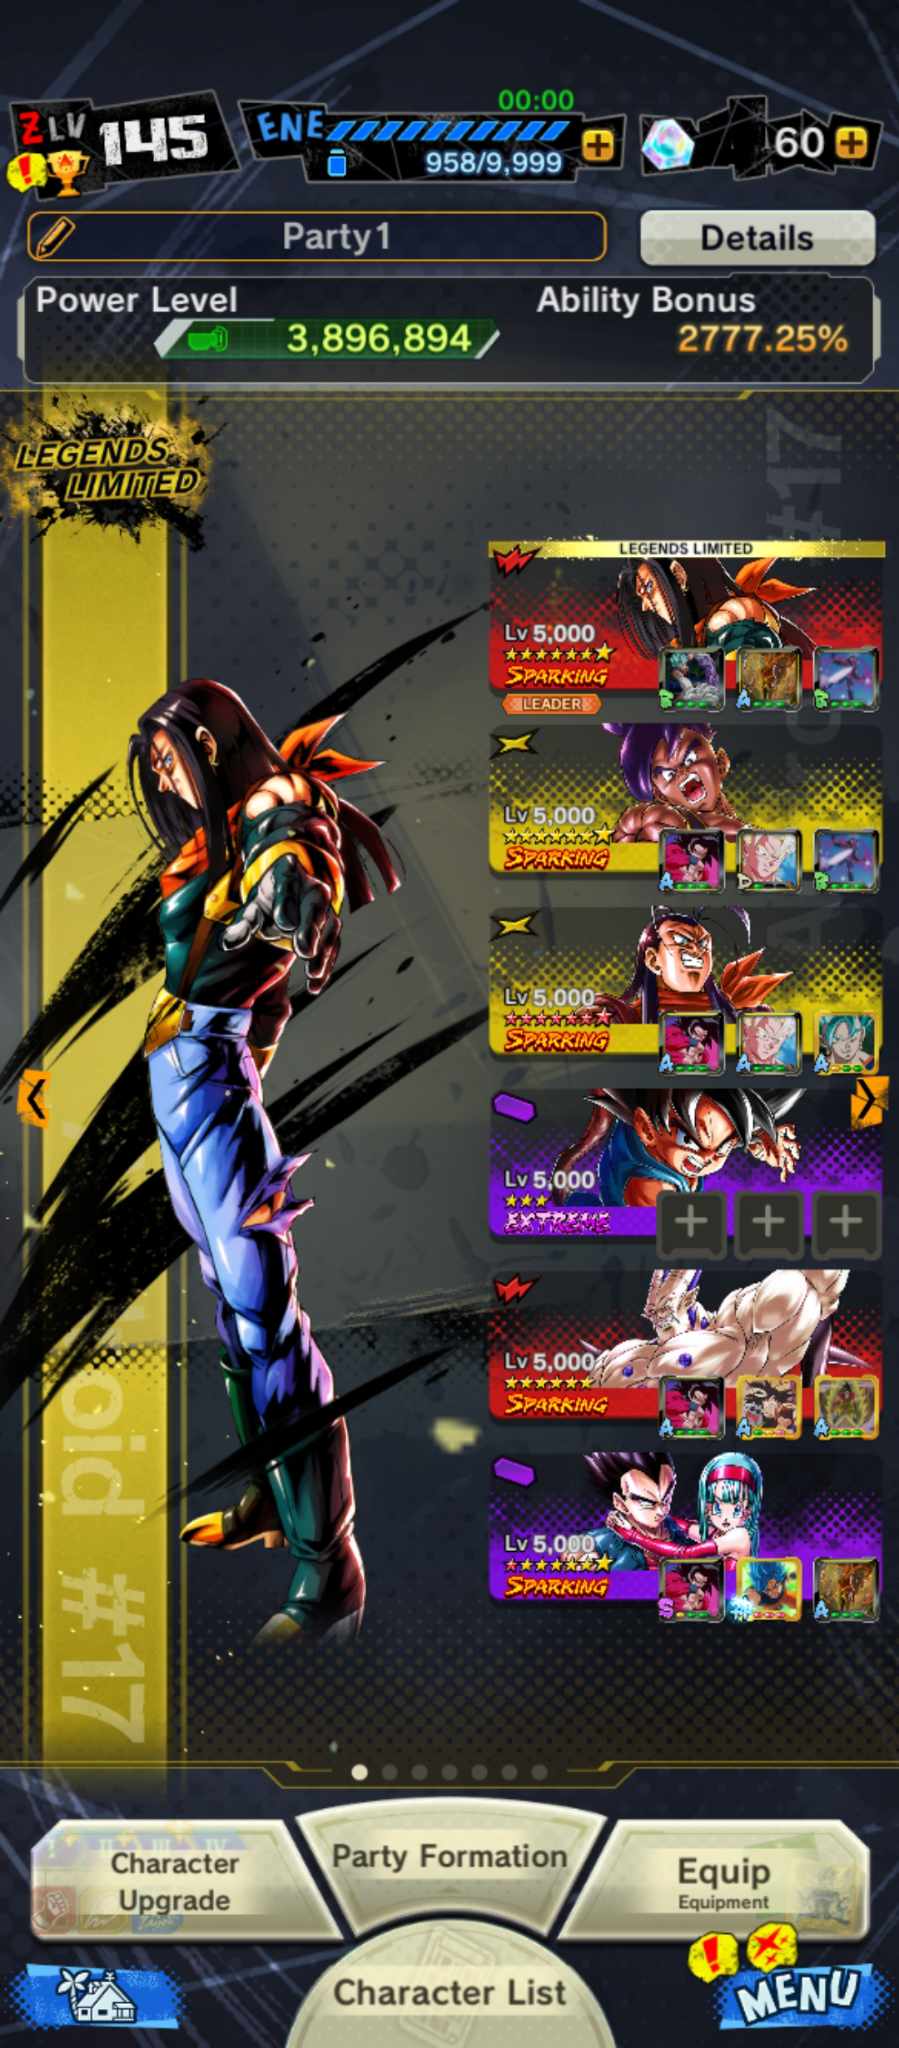 Android + IOS, login Bandai, 5 légendes qualifiées, Android 17 All - stars, Soul 10K